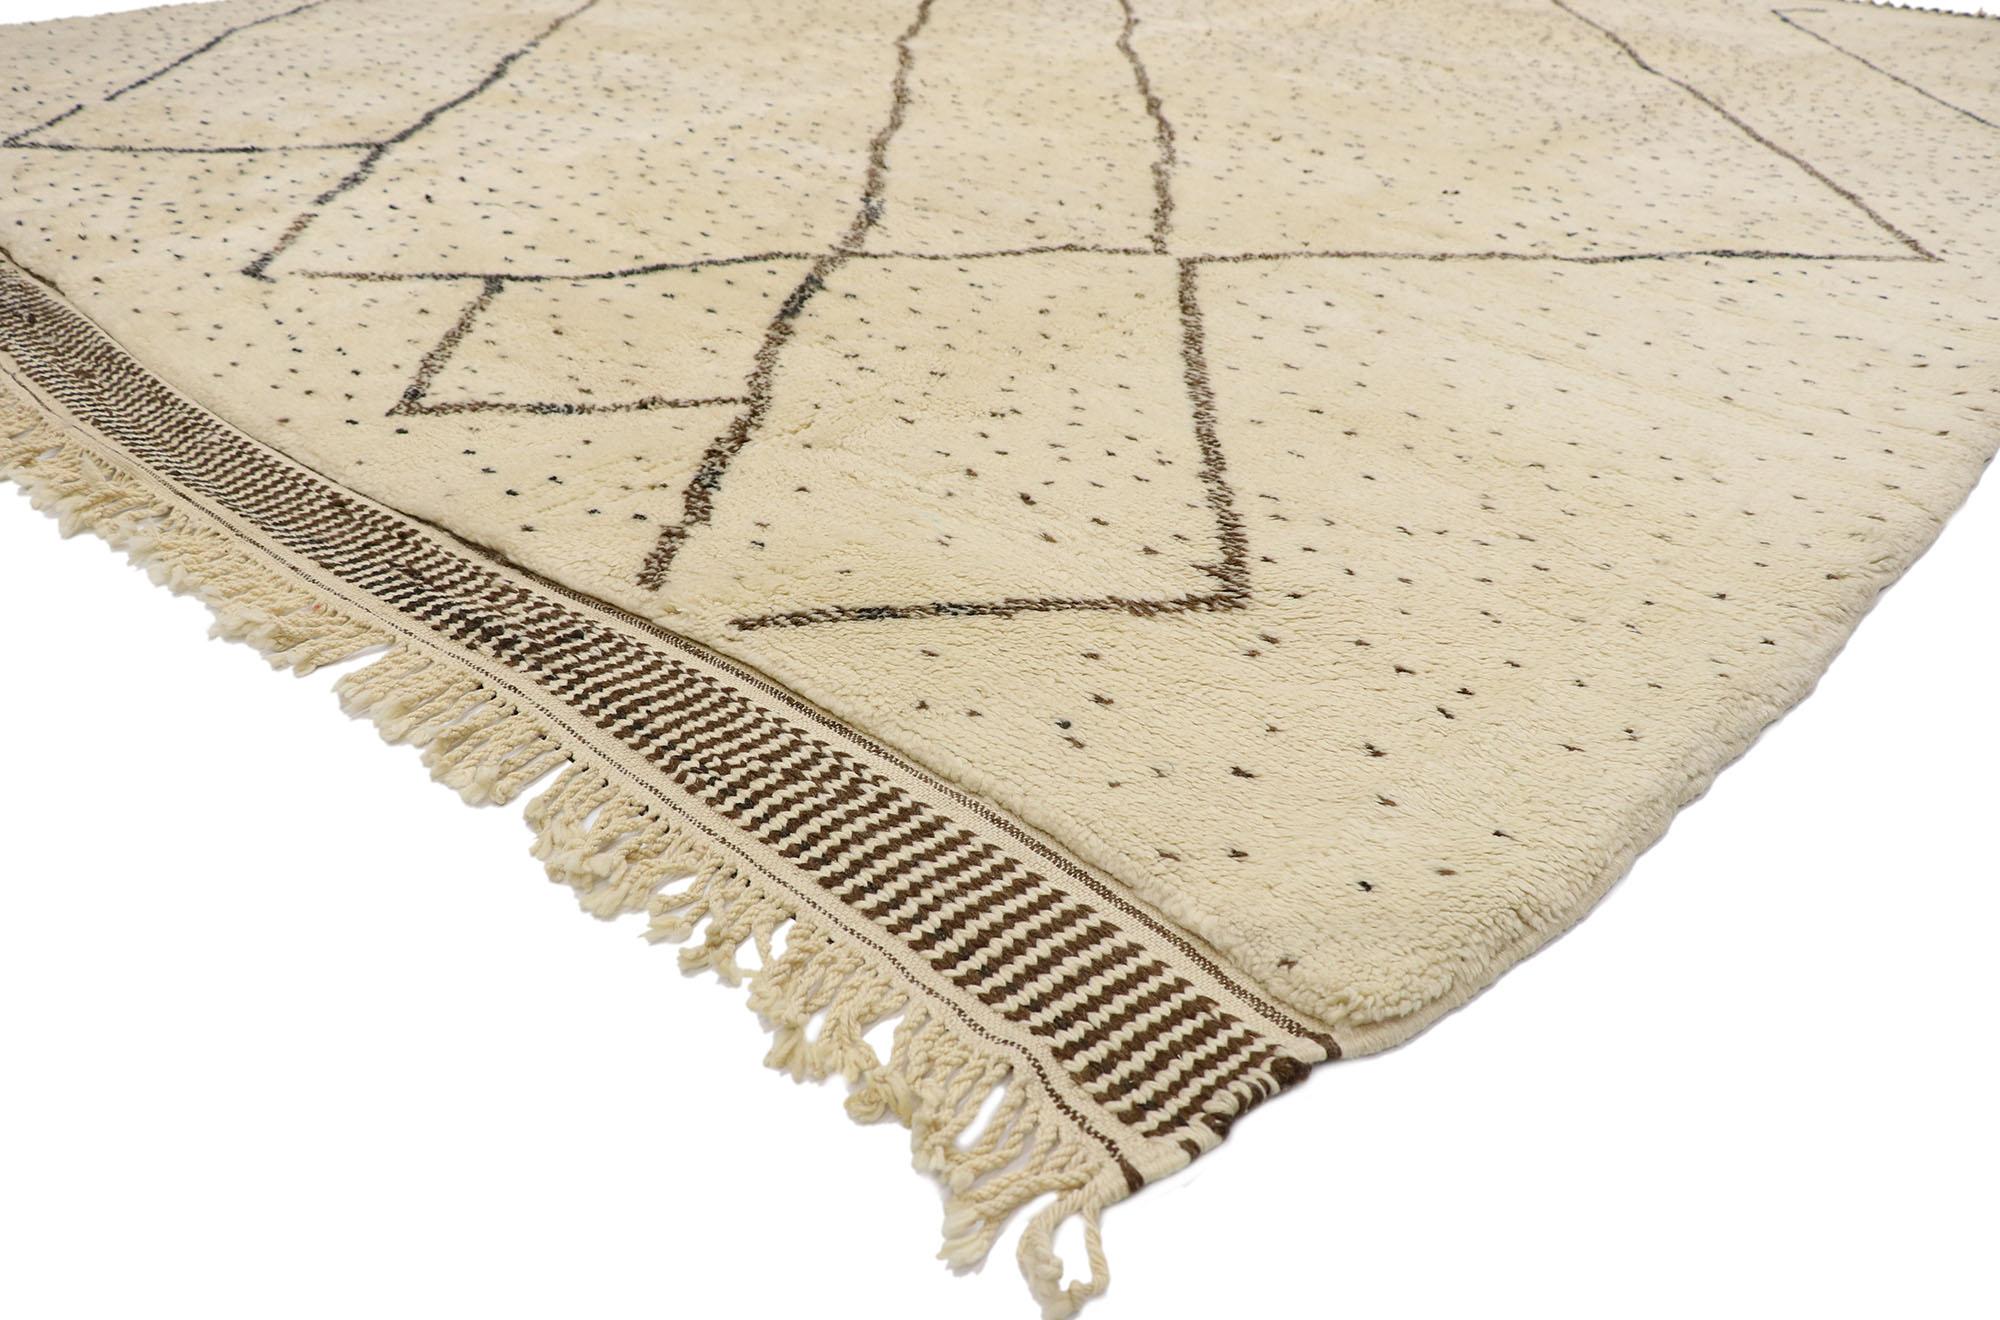 21152 Authentic Berber Moroccan Rug 10'09 x 12'03.
Nomadic charm meets Mid-Century Modern style in this hand knotted wool Berber Moroccan rug. The intrinsic tribal design and neutral colors woven into this piece work together creating a feeling of